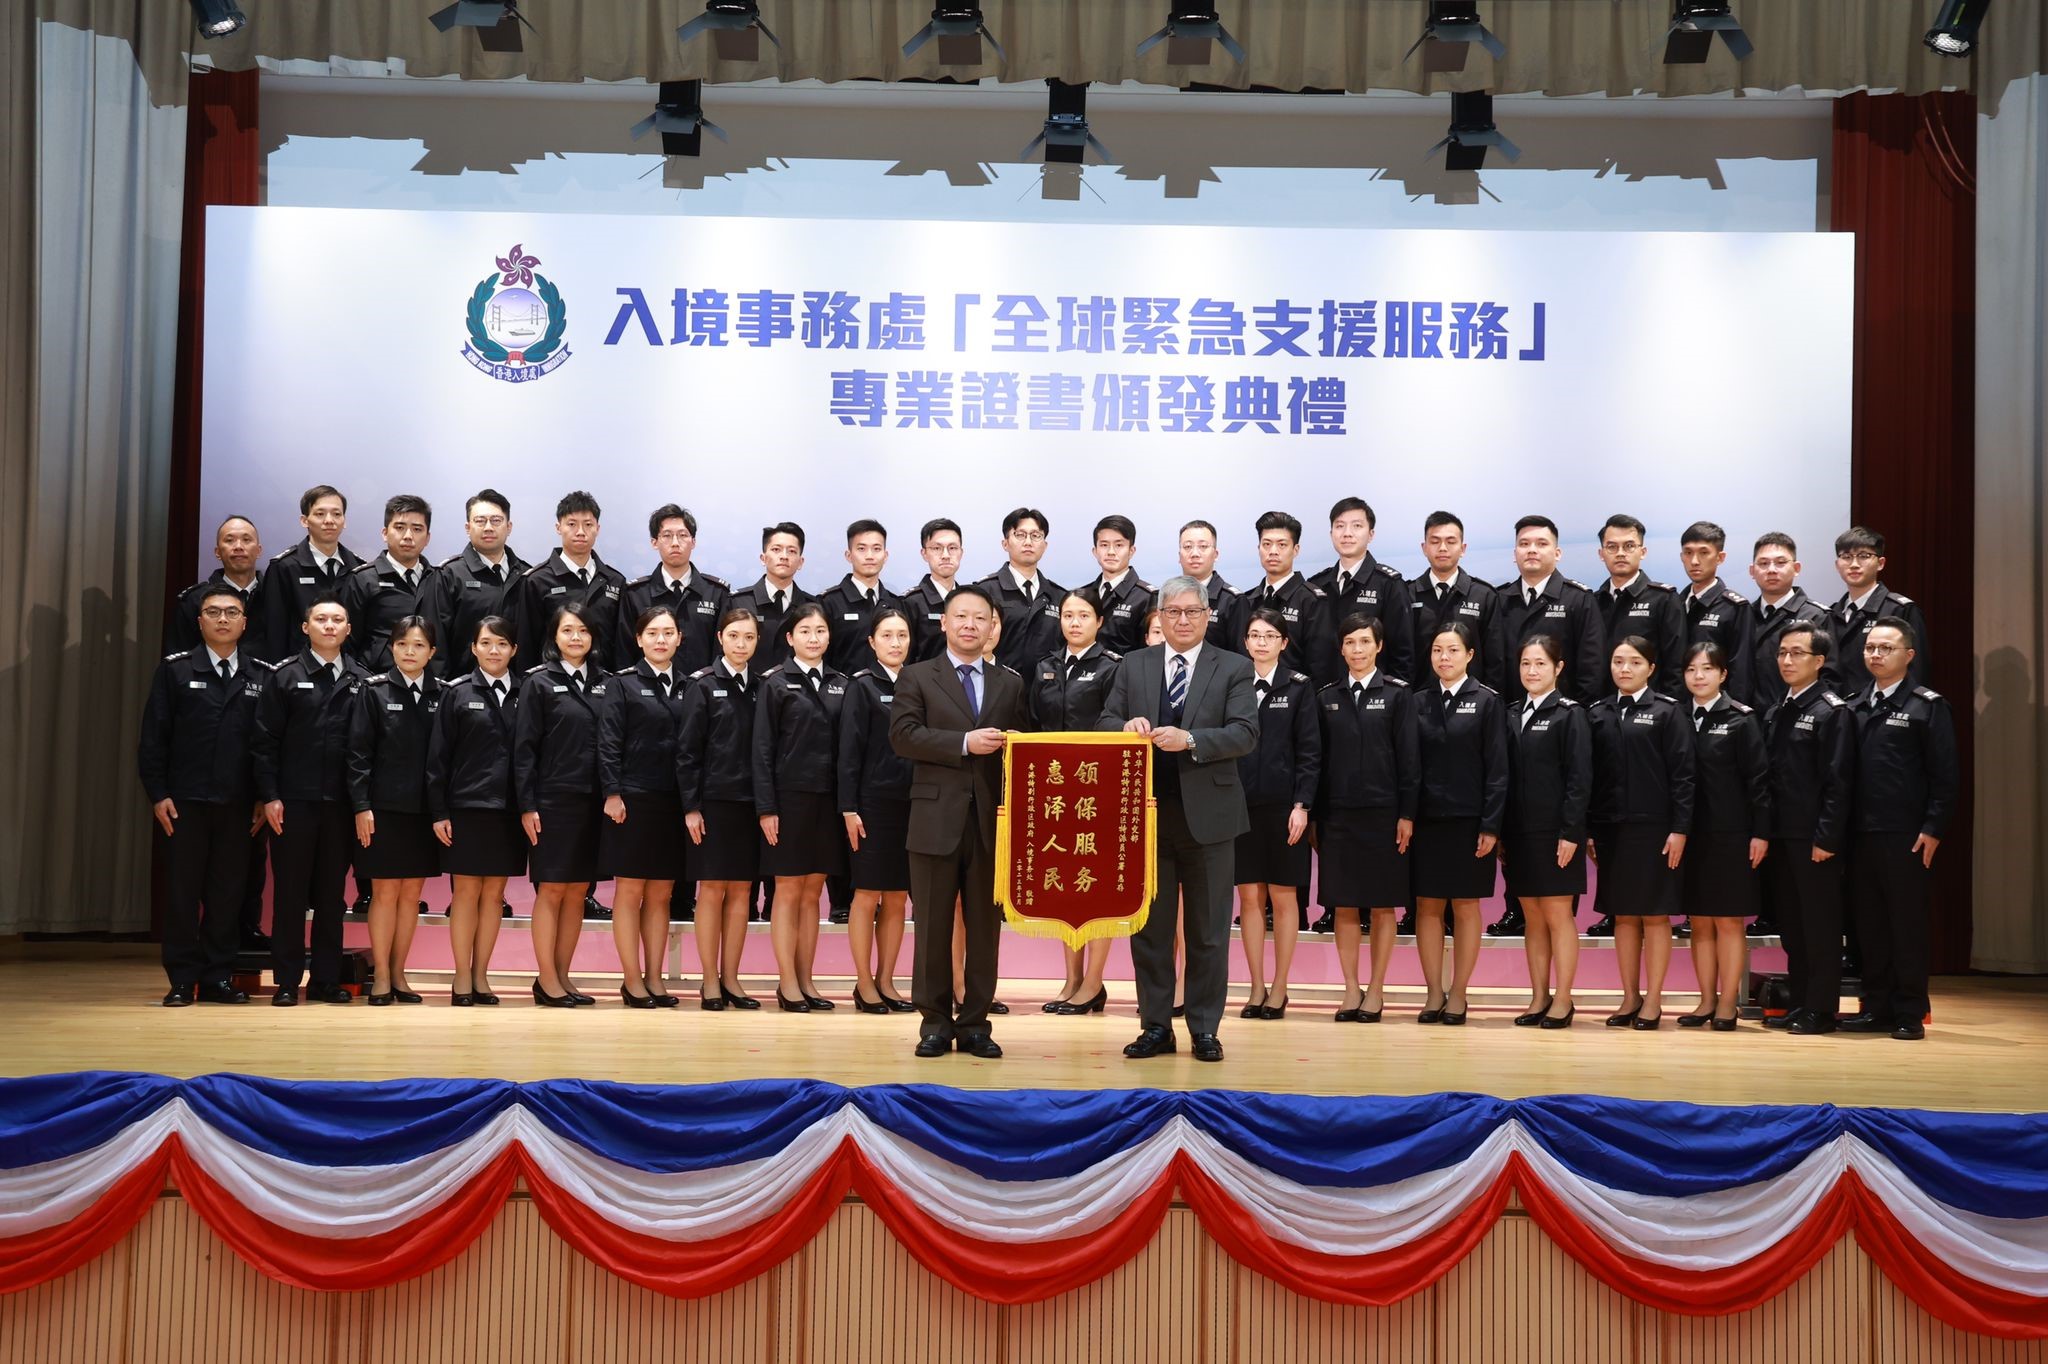 The Director of Immigration, Mr Au Ka-wang (front row, right), presents a silk banner to the Deputy Director-General of the Consular Department, Office of the Commissioner of the Ministry of Foreign Affairs in the Hong Kong Special Administrative Region, Mr Zheng Jie (front row, left), at the certificate presentation ceremony for 